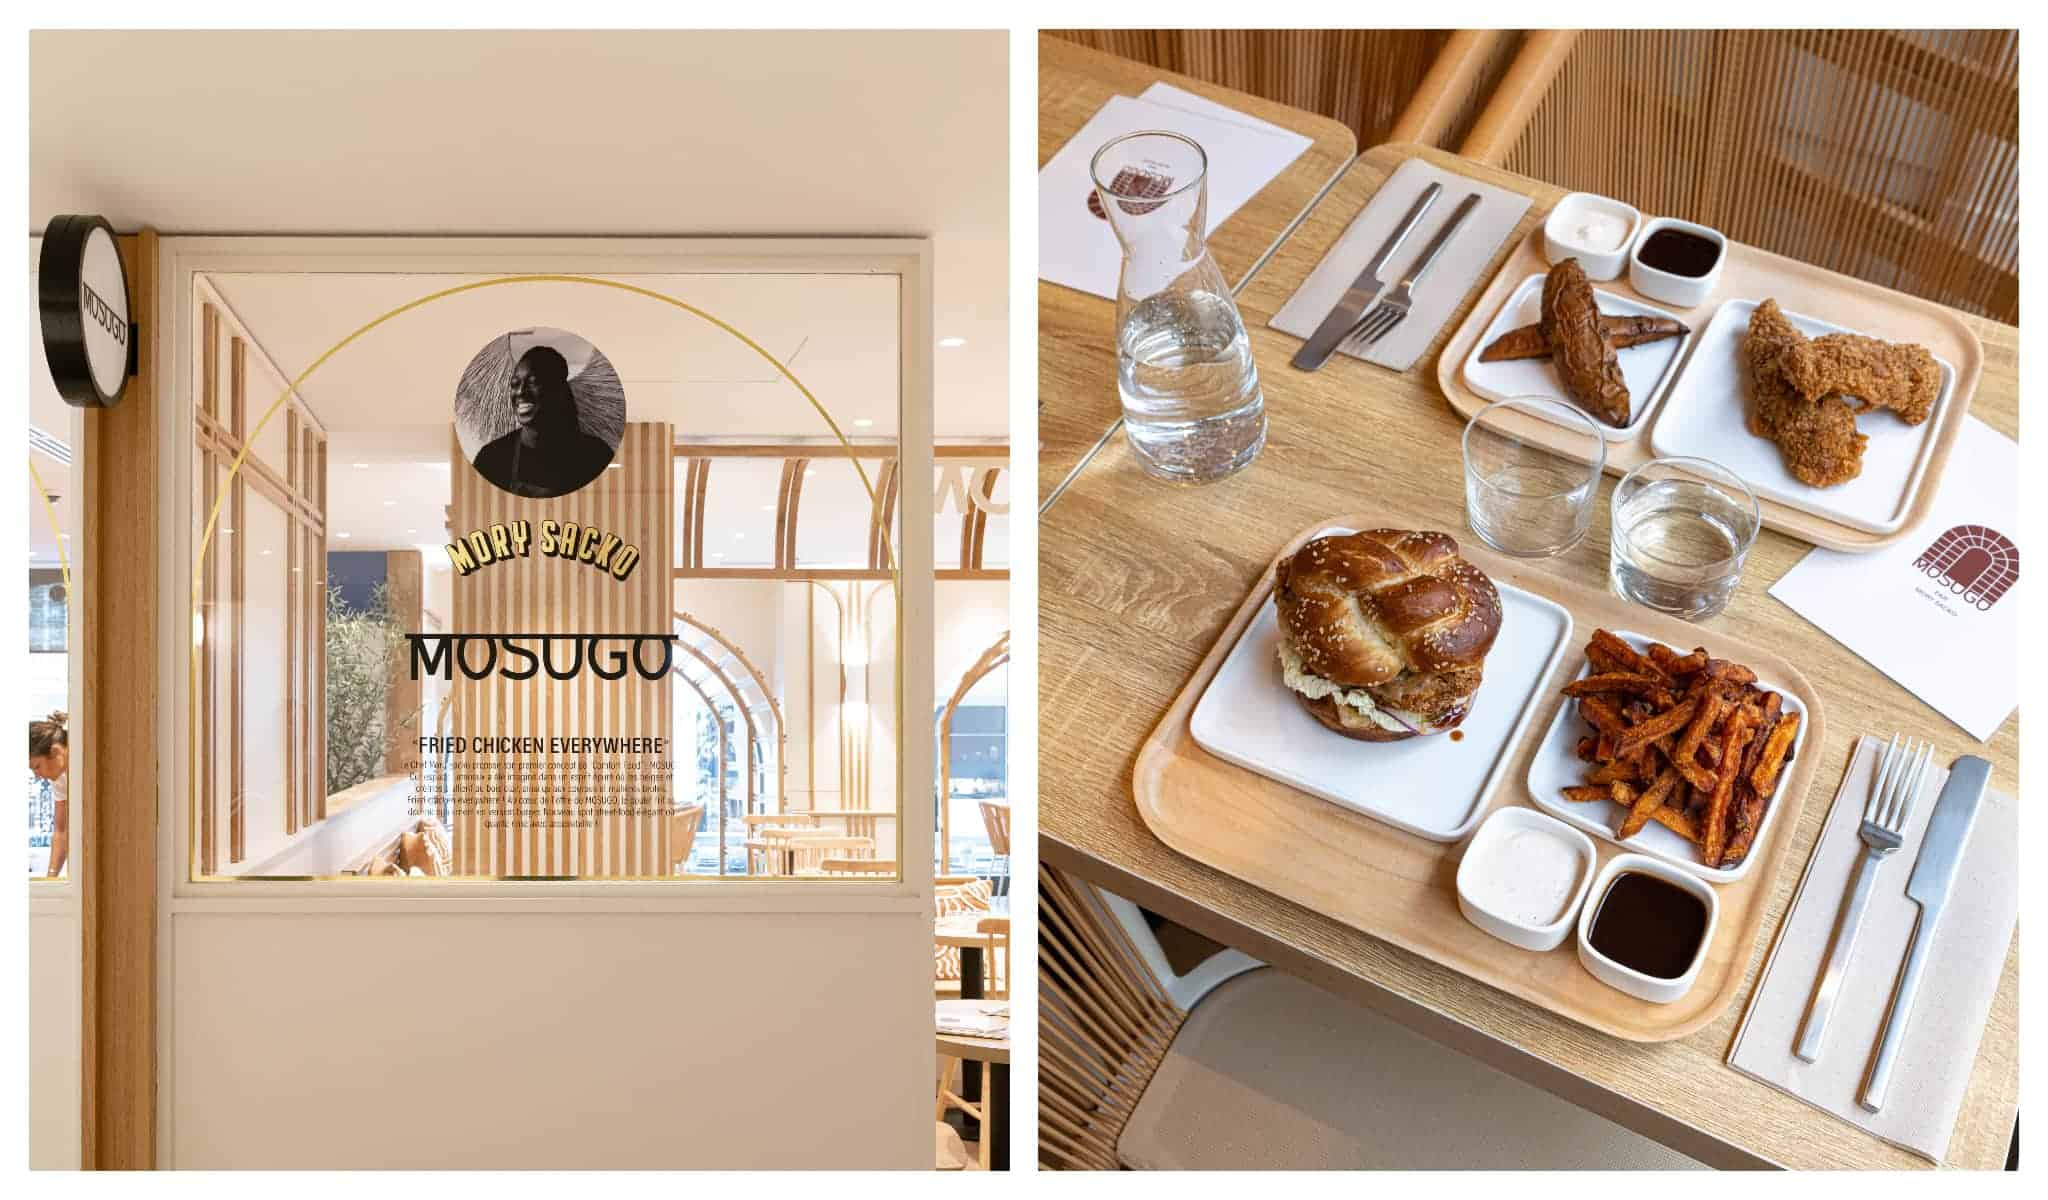 Left: the exteriors of restaurant Mosugo by Mory Sacko. Right: fried chicken and other foods on display at Mosugo restaurant by Mory Sacko